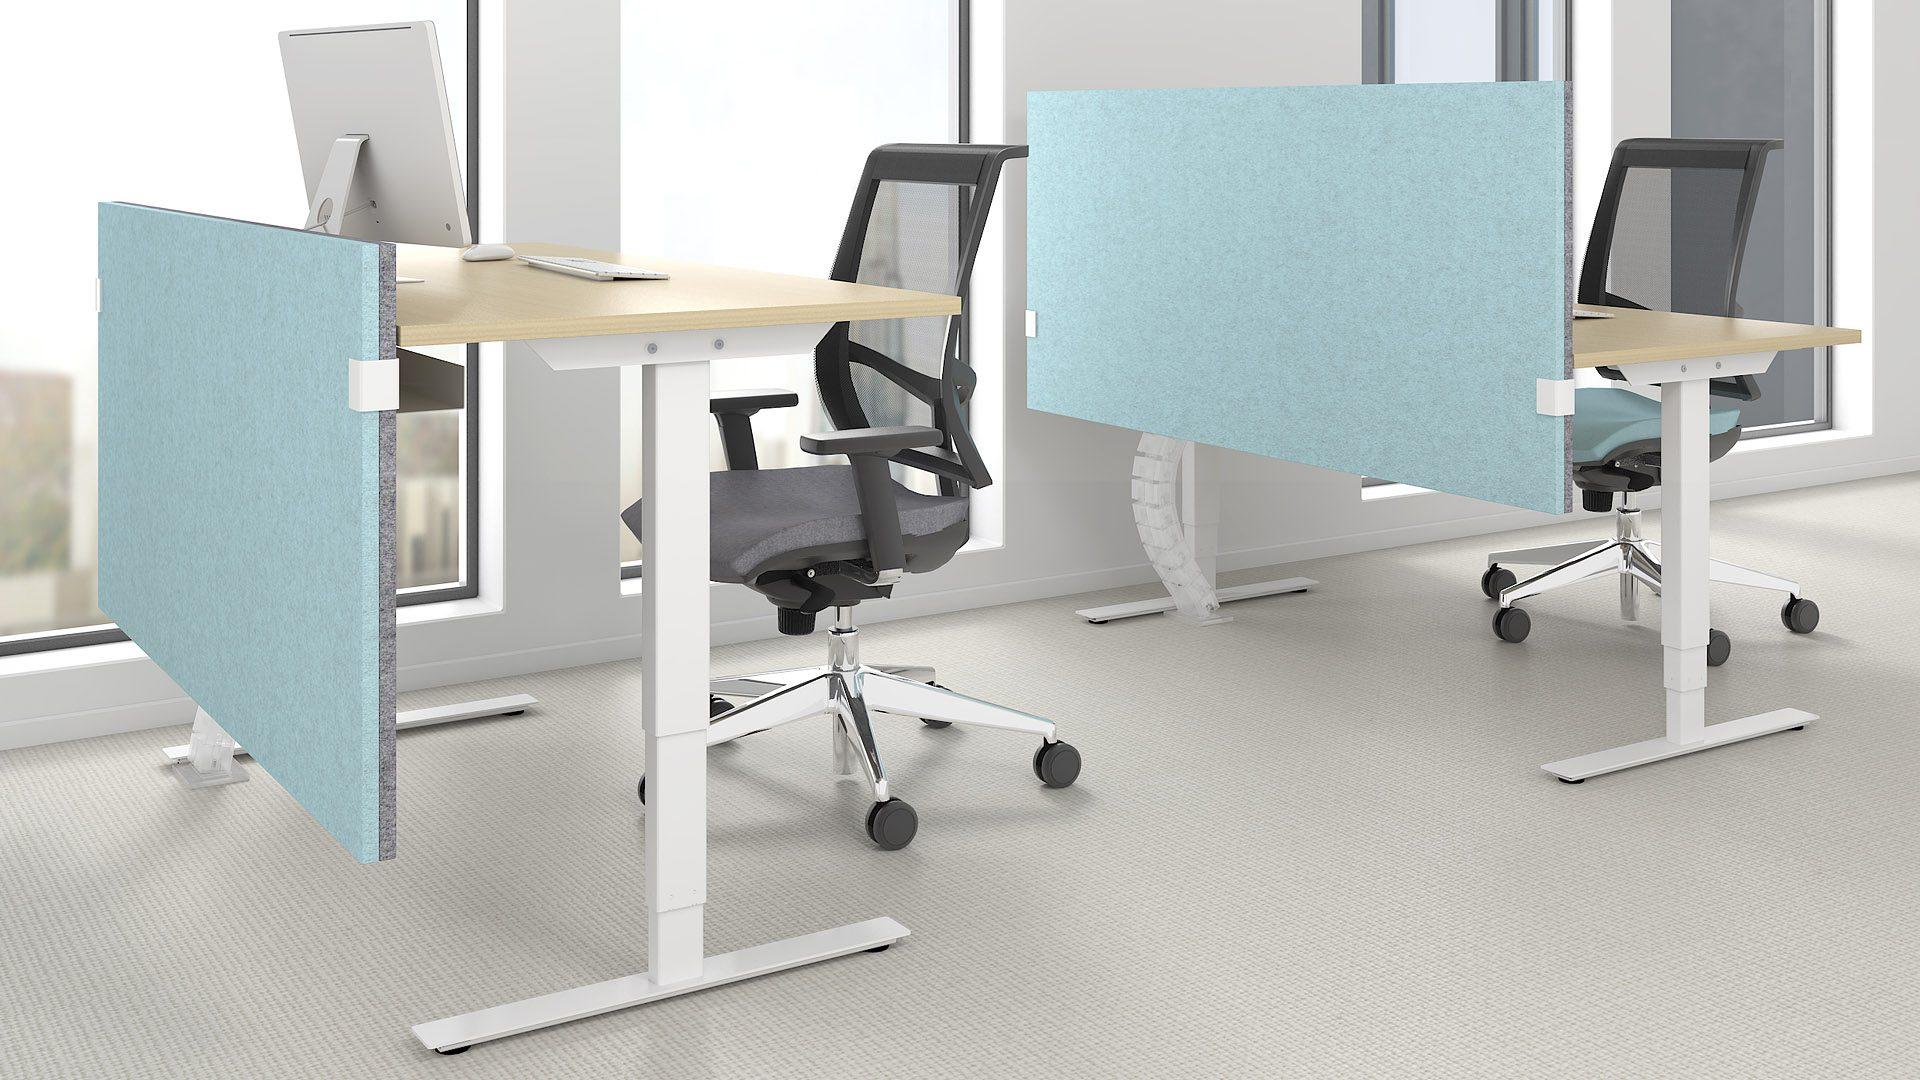 Modus screens can also be used as fabric modesty panels for desks